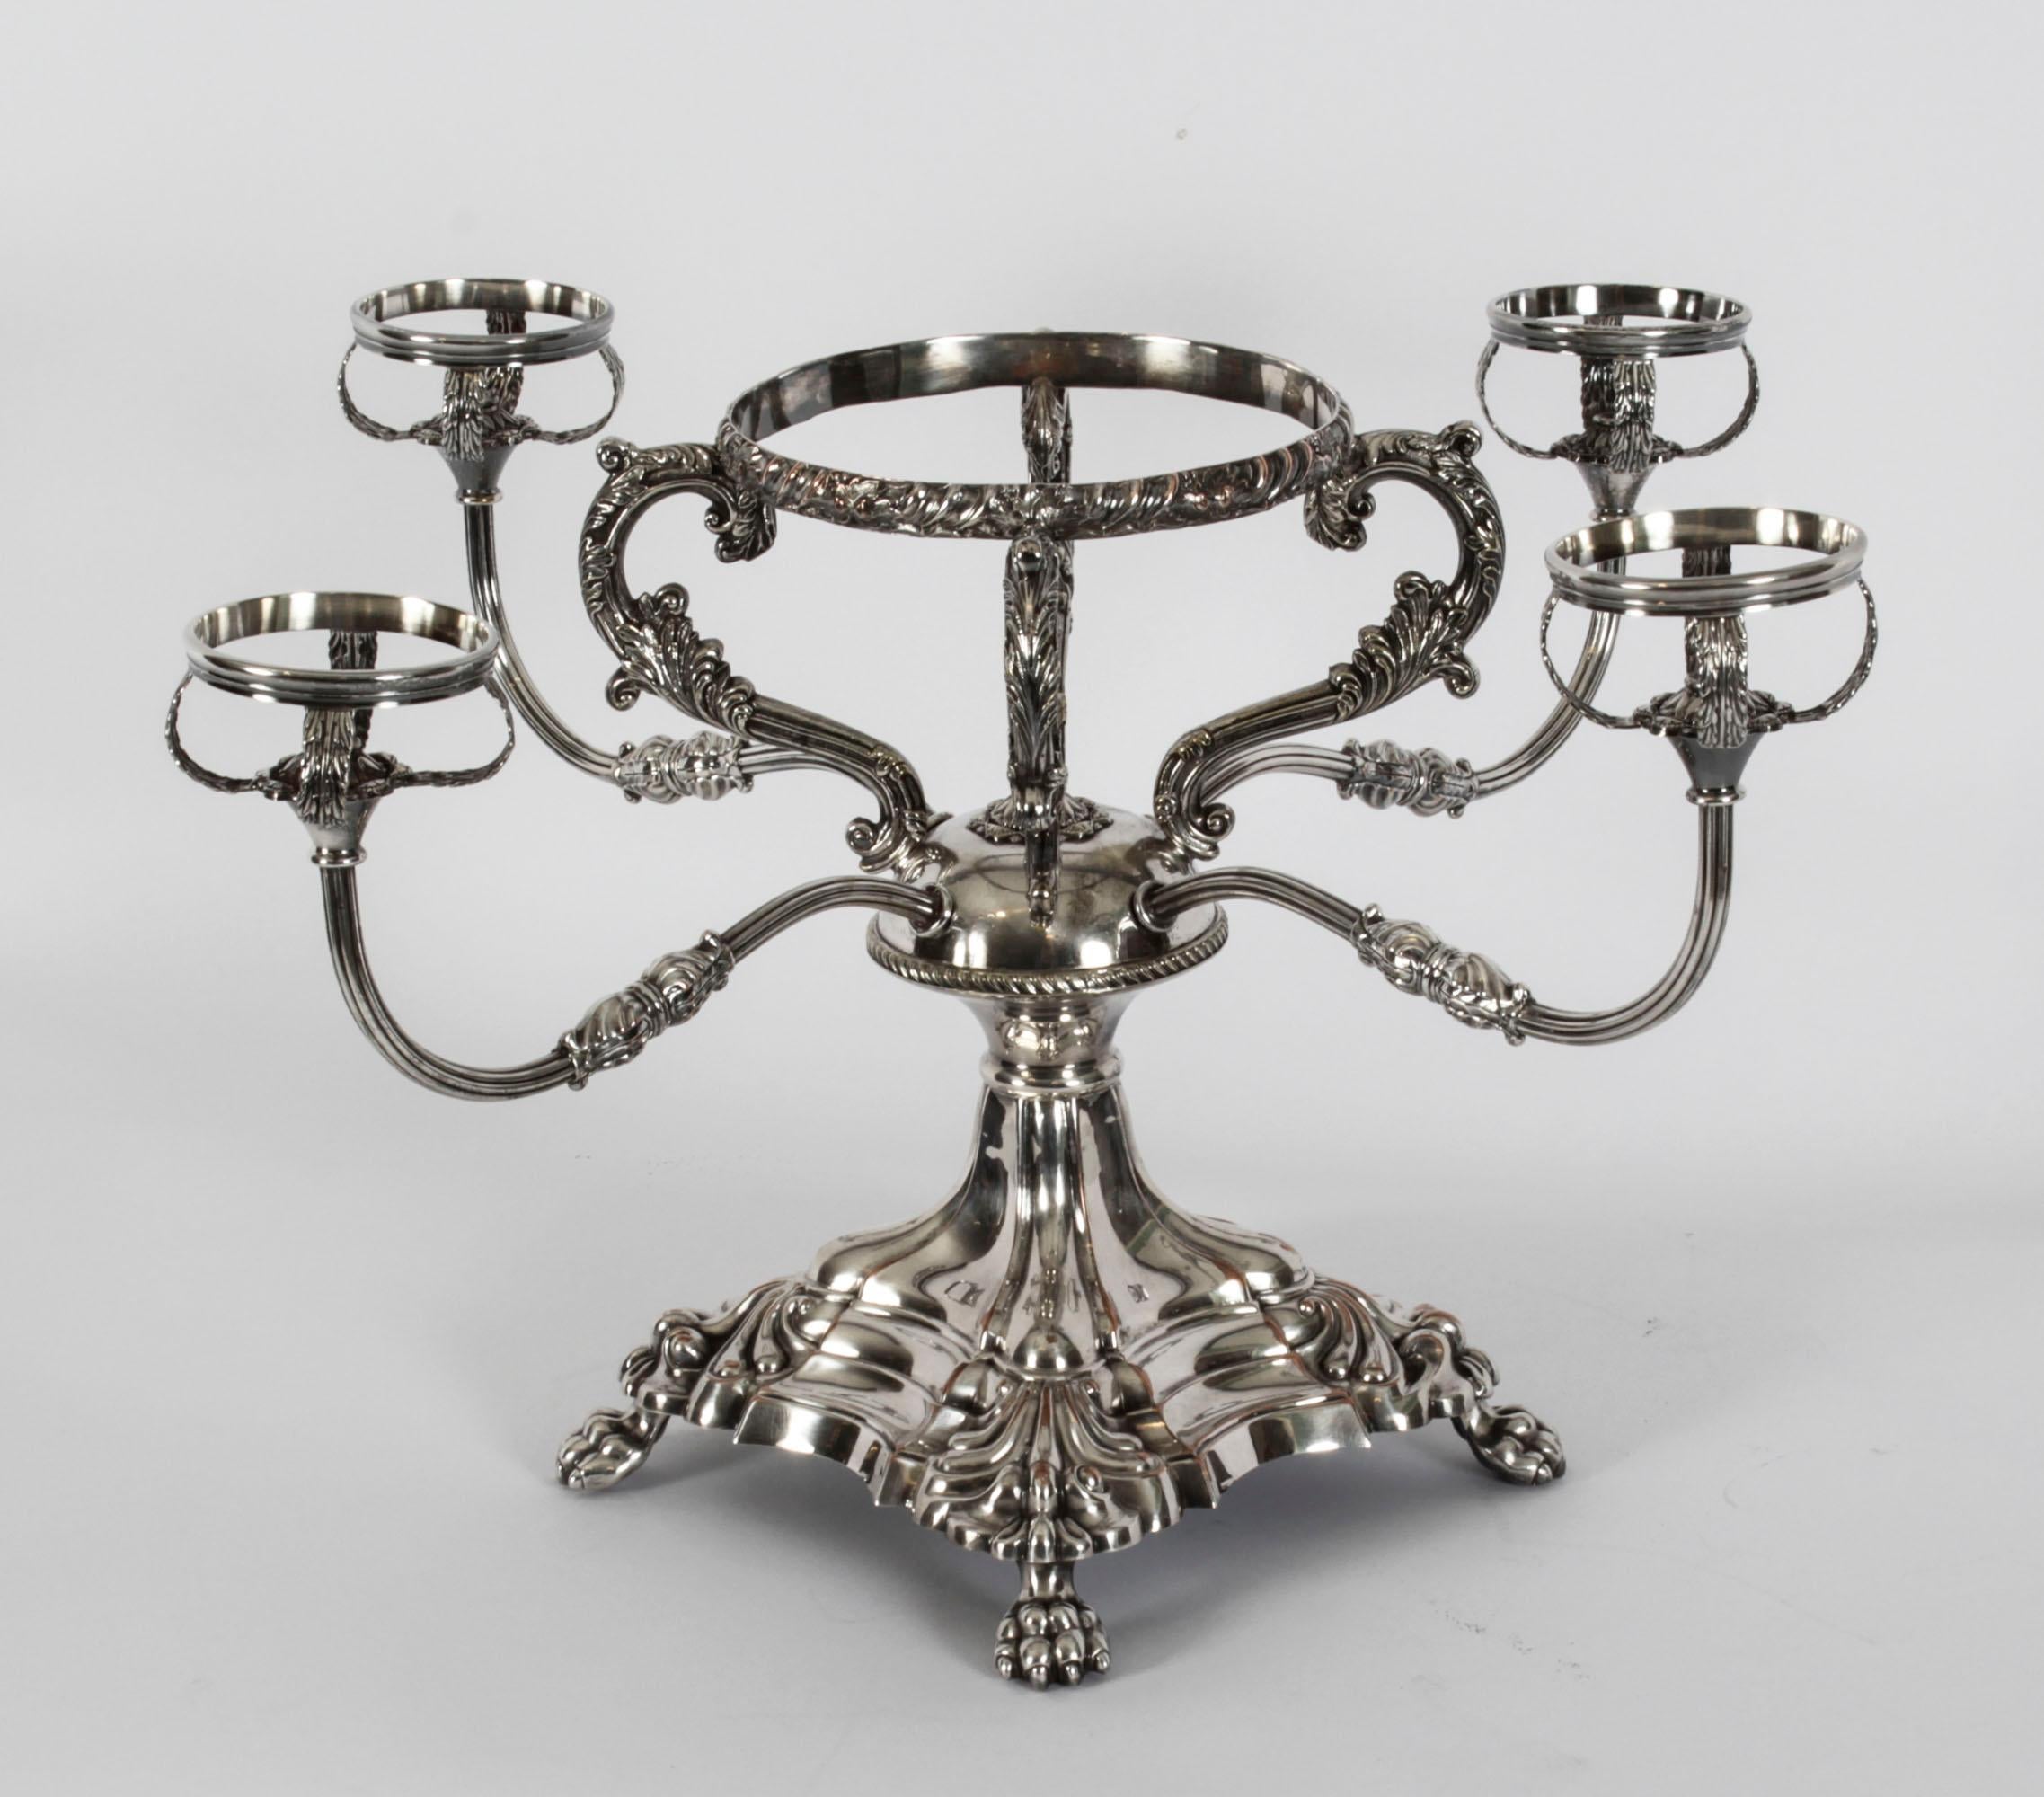 Antique English Silver Plate Cut Glass Epergne Candelabra Centrepiece 19th C 10